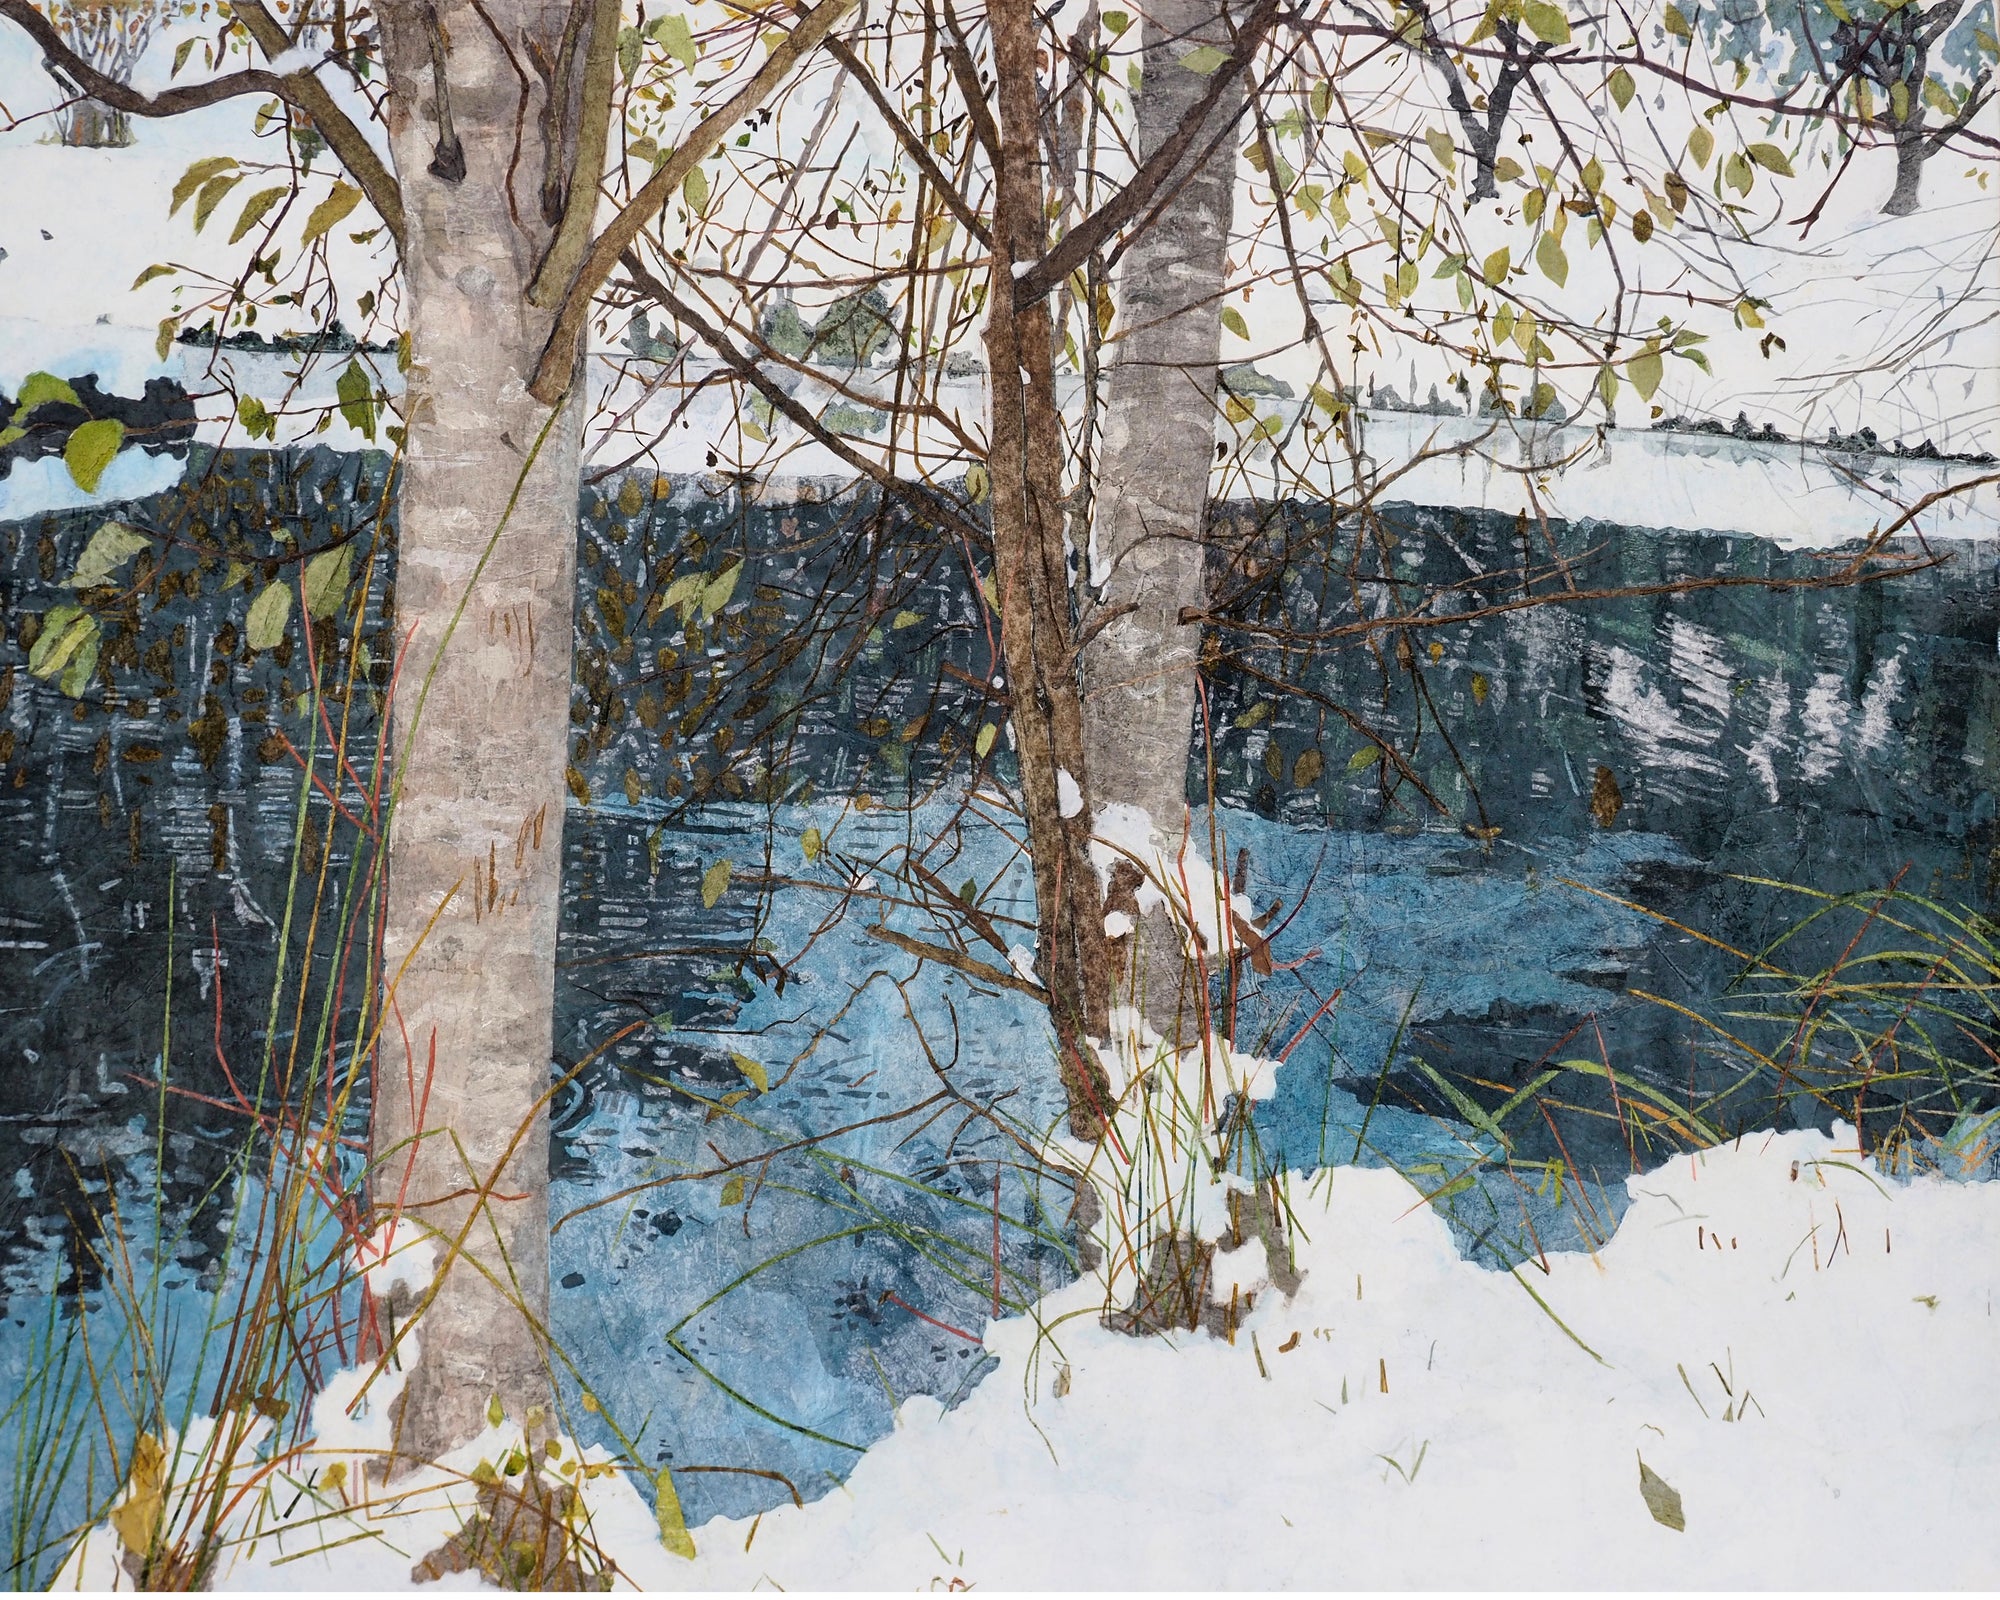 paper collage by salt spring artist bly kaye depicting winter scene over pond with reflections